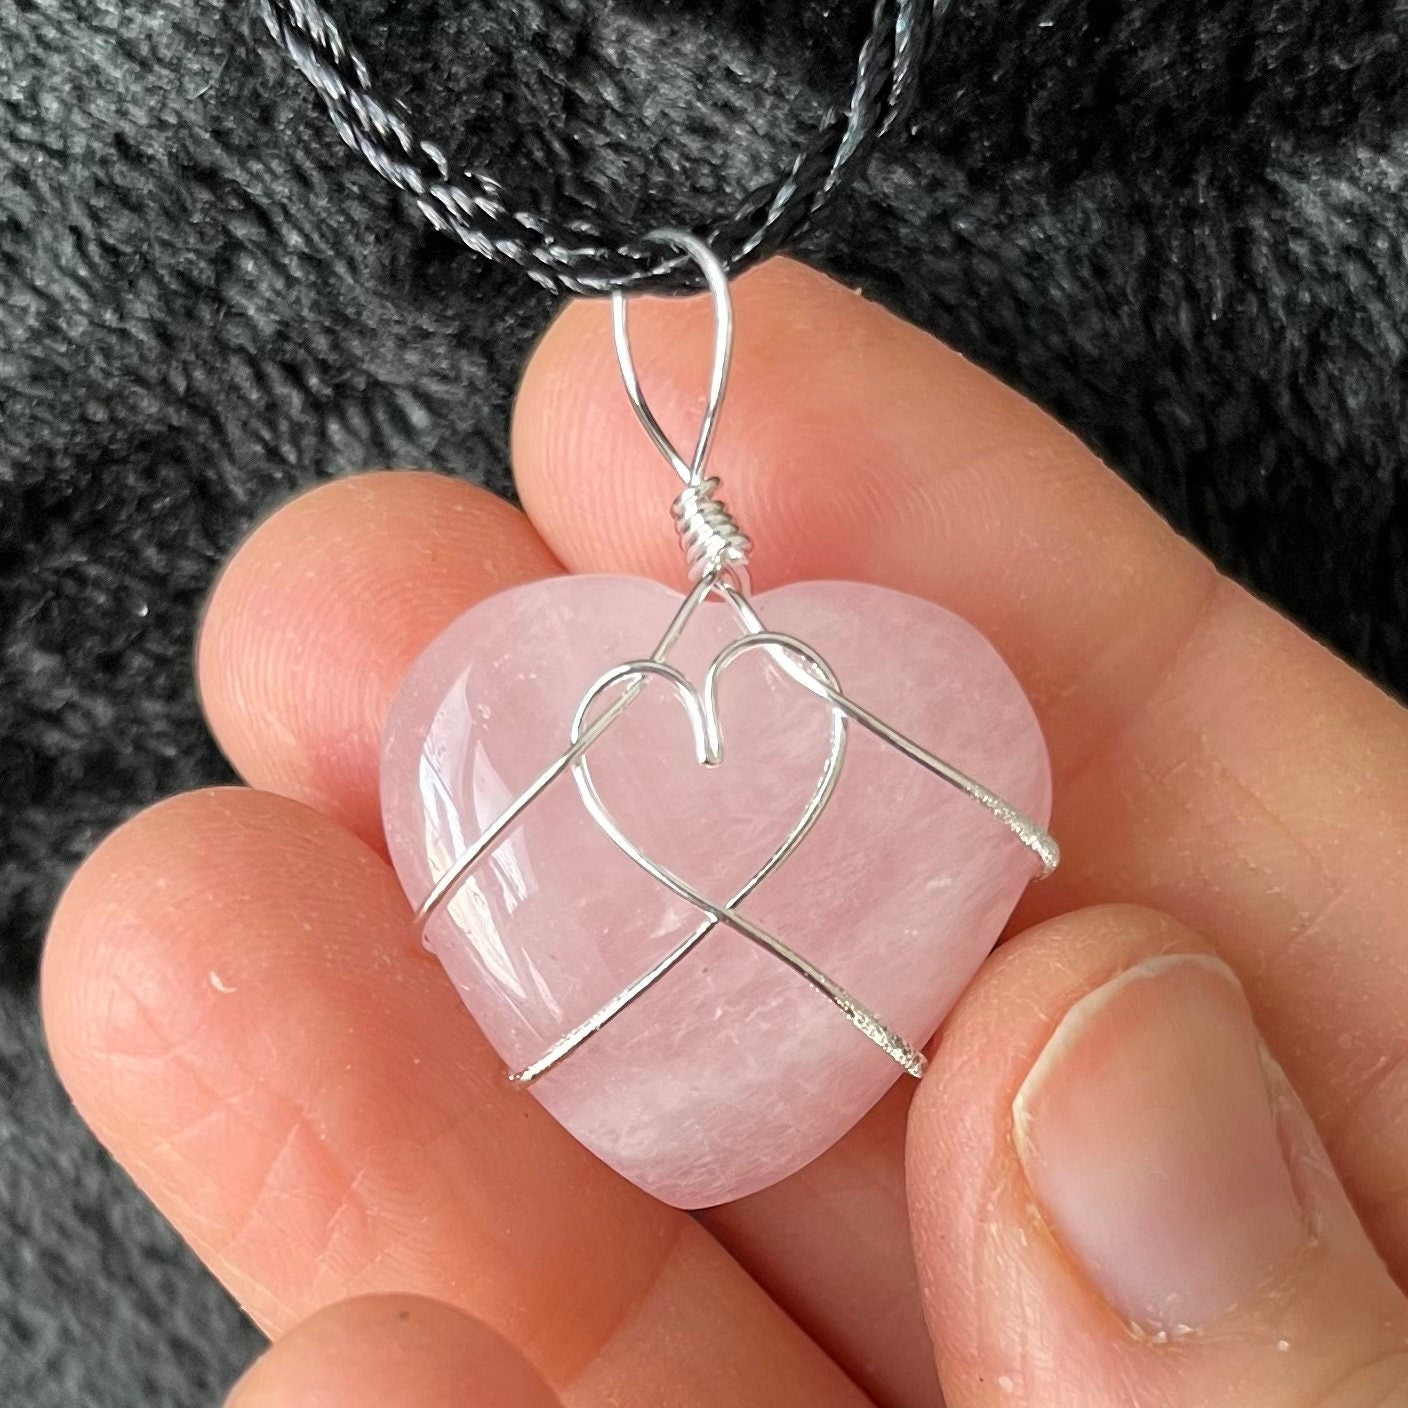 Wire-wrapped rose quartz heart necklace: a silver wire intricately wraps around a polished rose quartz heart pendant, hanging on a delicate chain.  The wire makes a heart shape in the middle of the rose quartz heart.